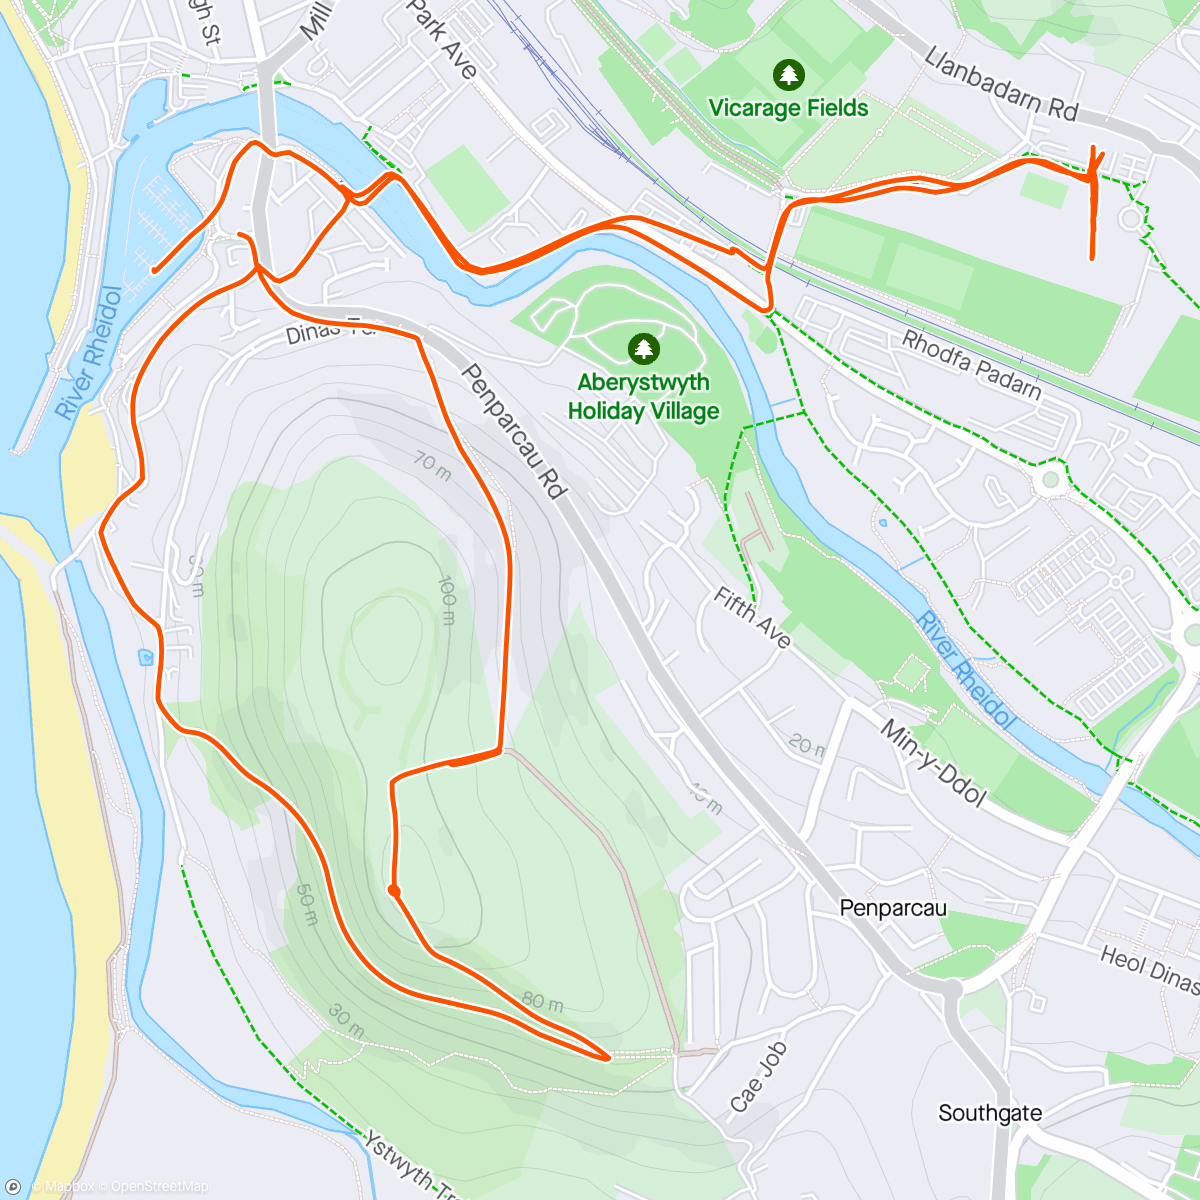 Mapa da atividade, Club session including warm up (run up pen Dinas!)
Then short hill efforts by the horse field.
Pleased with the progression.